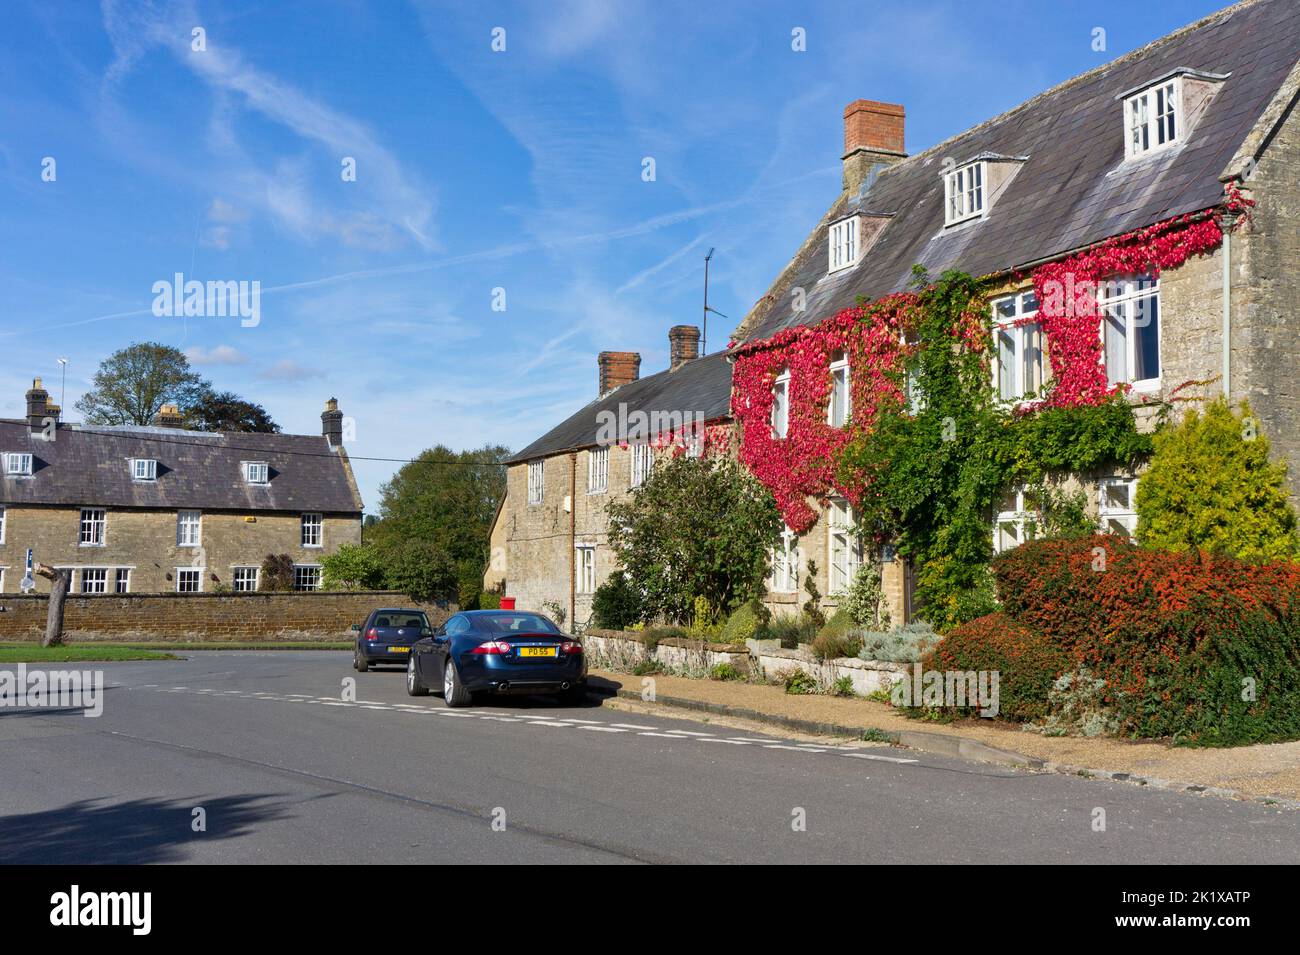 Street view in Autumn in the pretty village of Sulgrave, Northamptonshire, UK Stock Photo